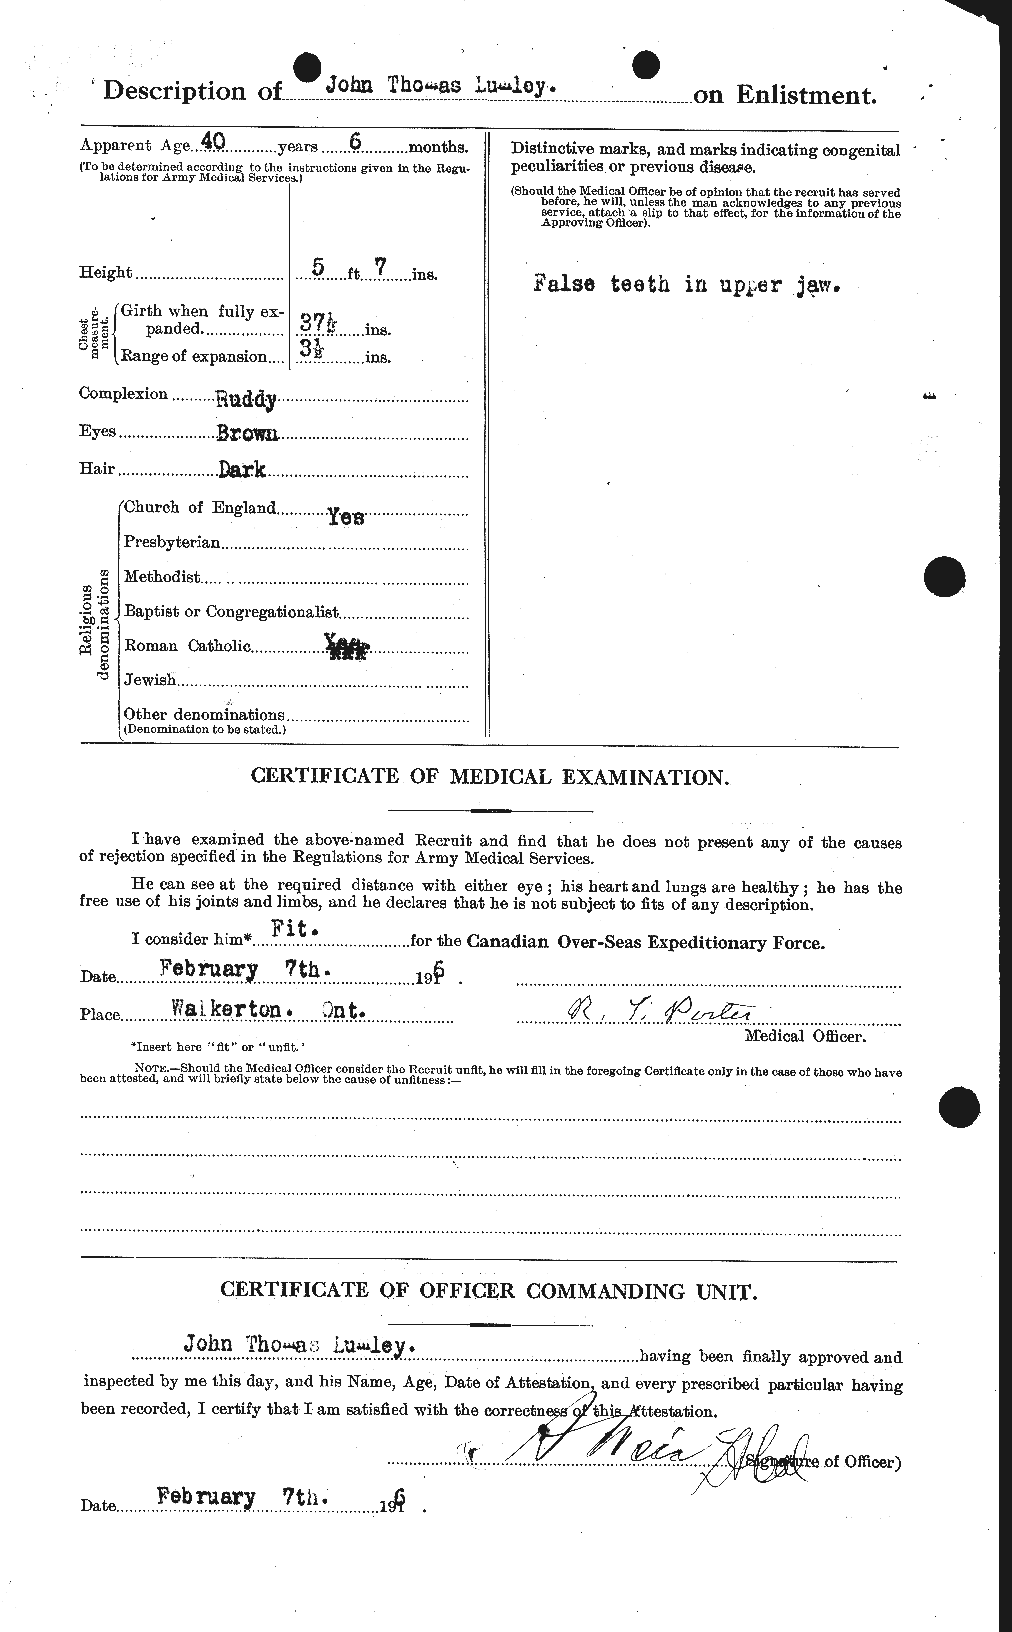 Personnel Records of the First World War - CEF 470810b